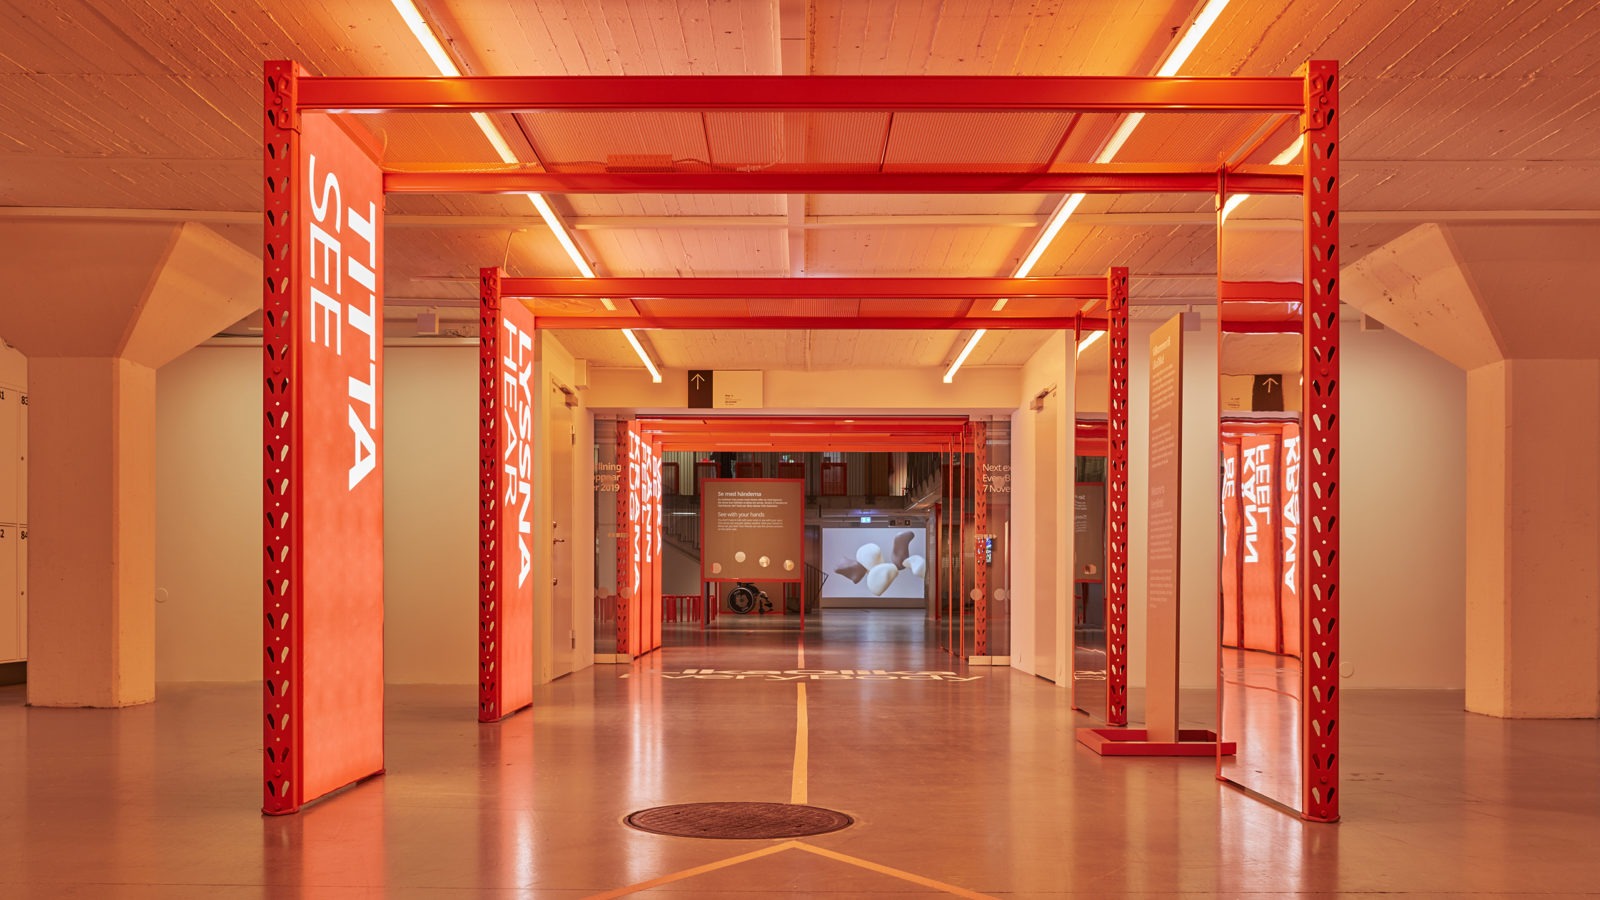 A corridor inside IKEA Museum with orange light and several orange arches with large, white writing saying ‘SEE’, ‘HEAR’ etc.